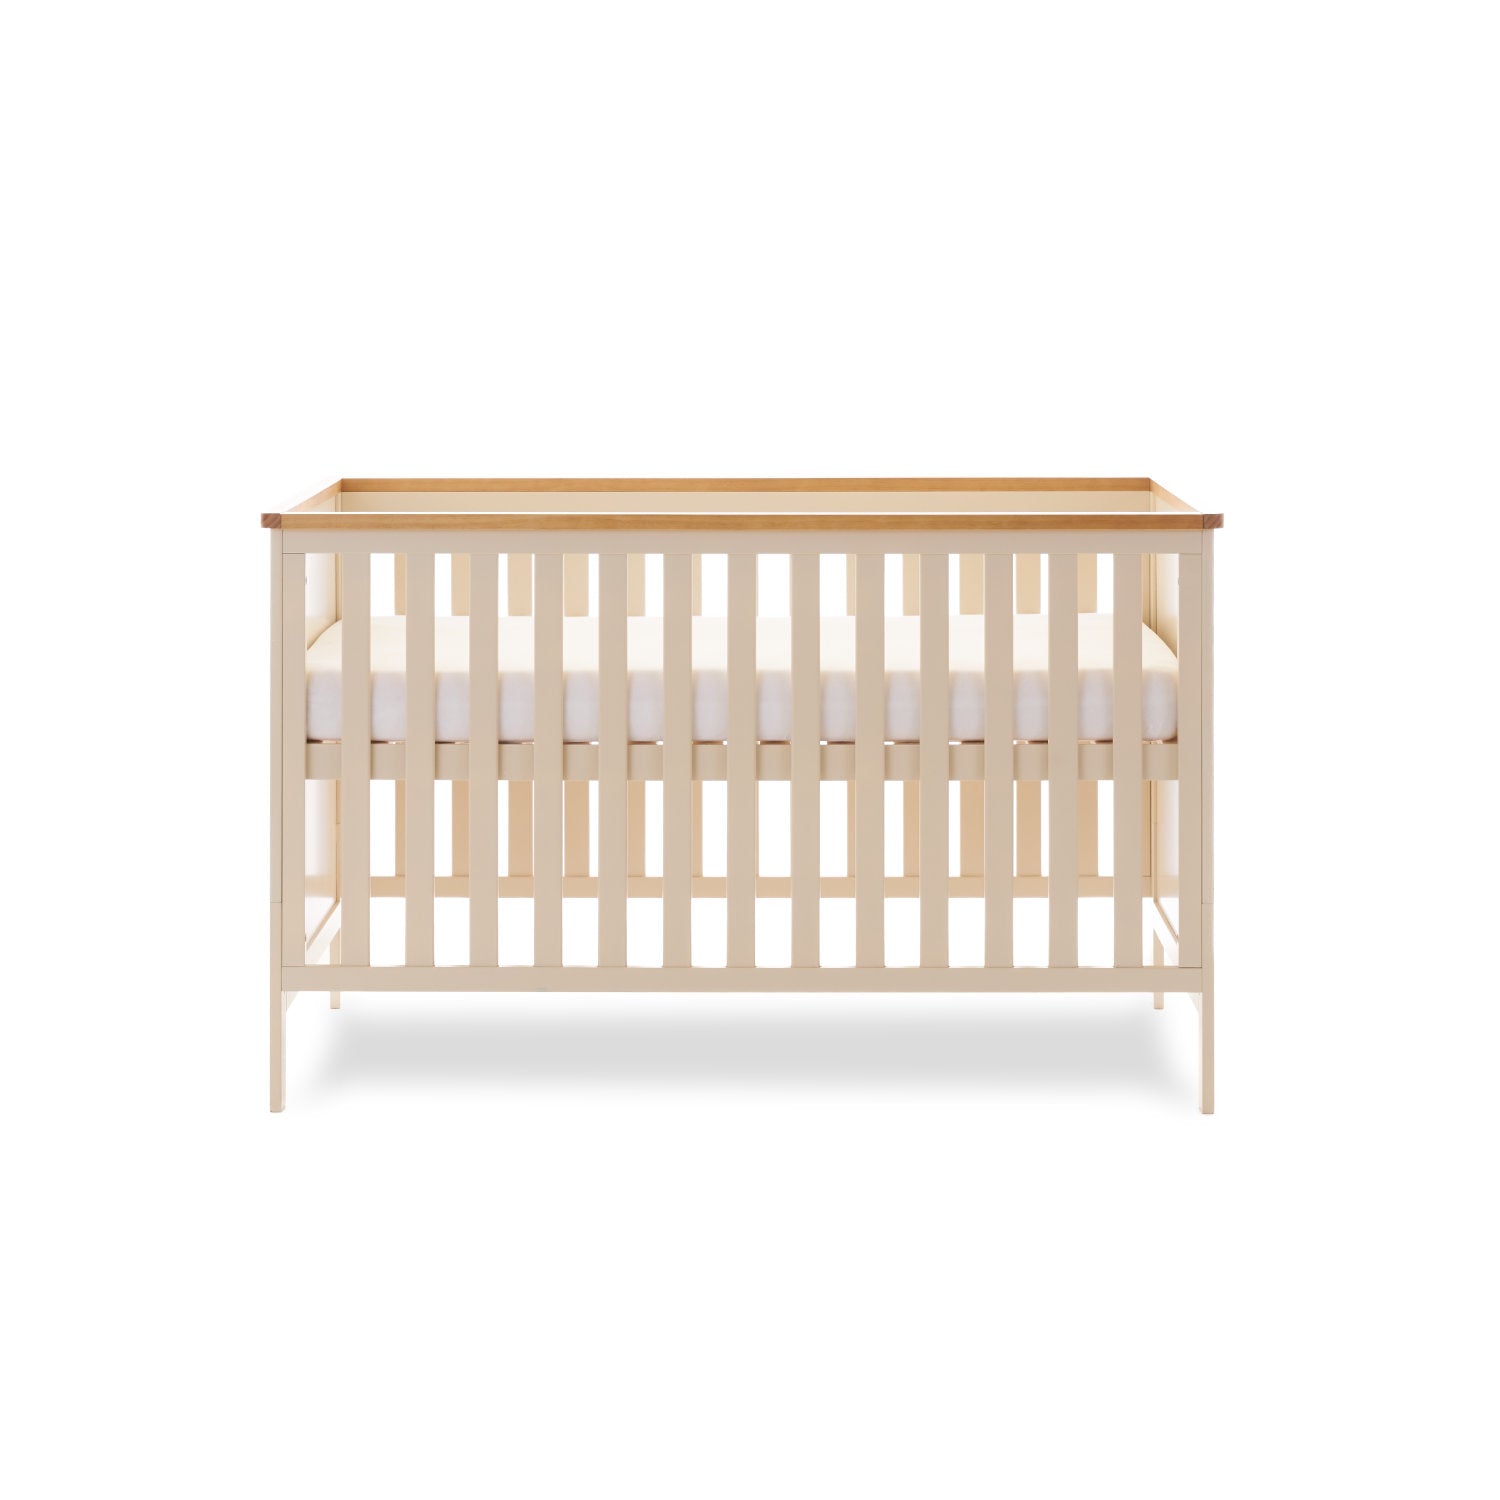 Evie Cot Bed - Cashmere